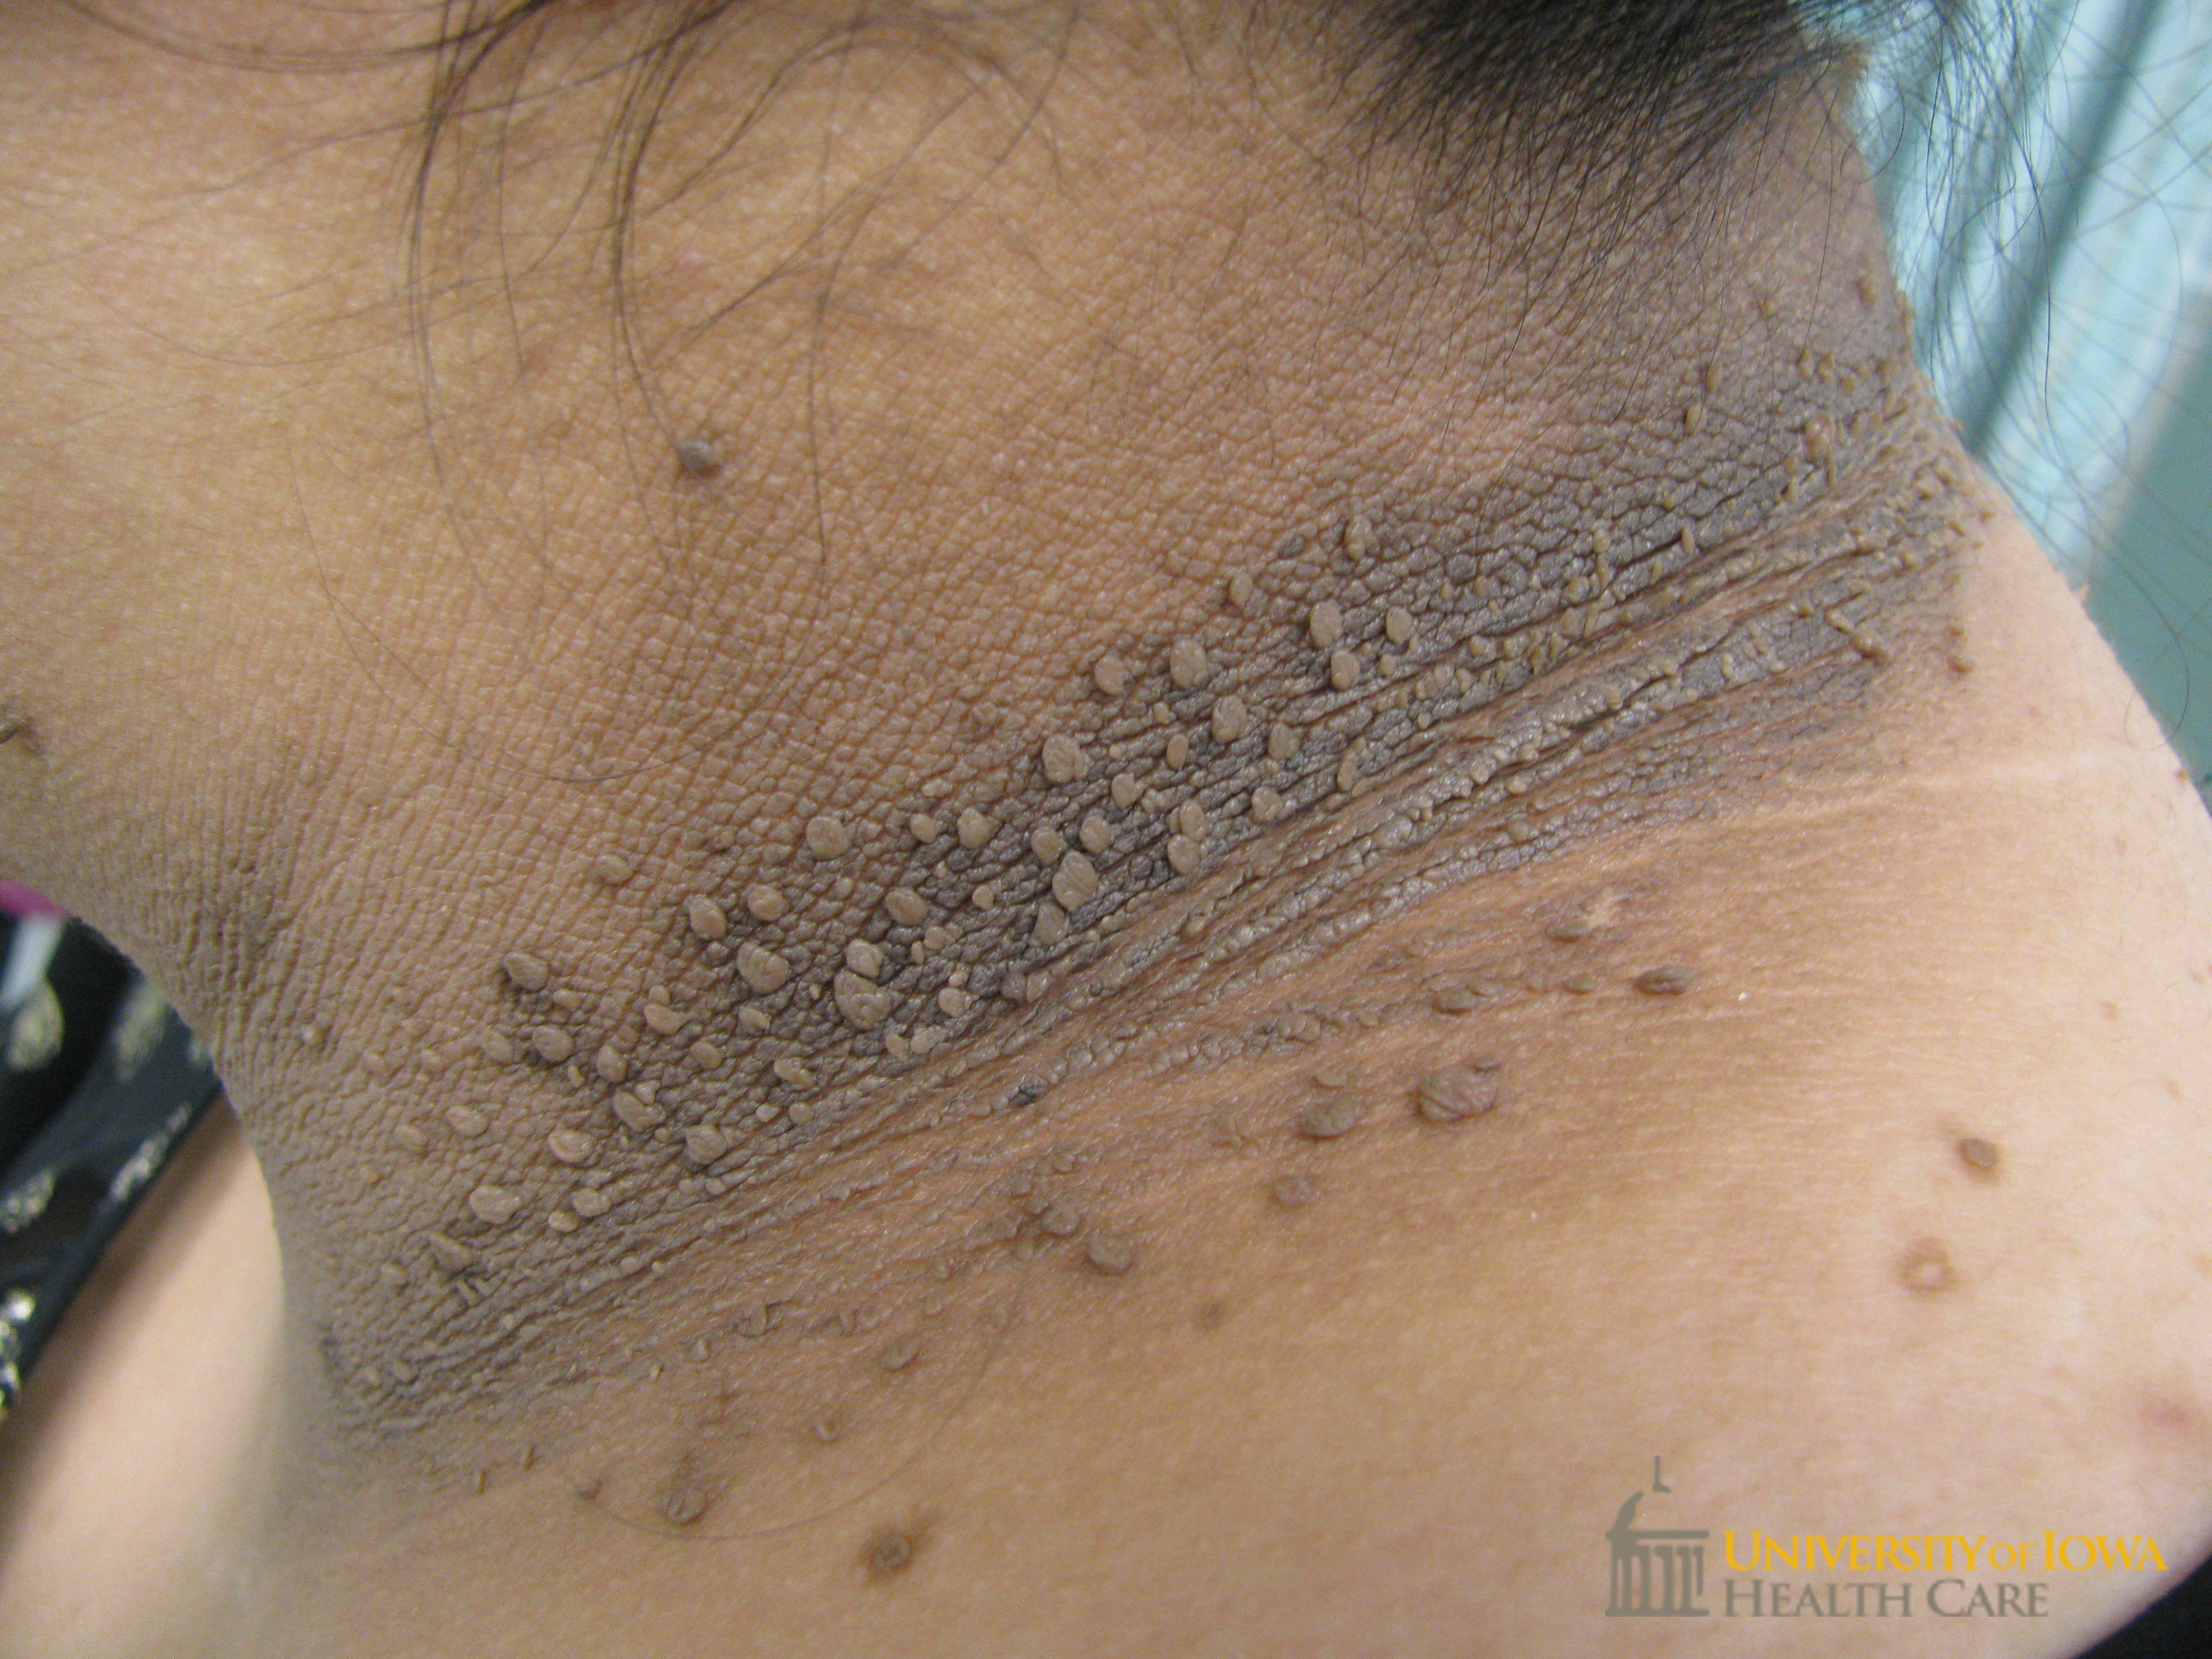 Gray velvety plaques with overlying pedunculated papules on the neck. (click images for higher resolution).